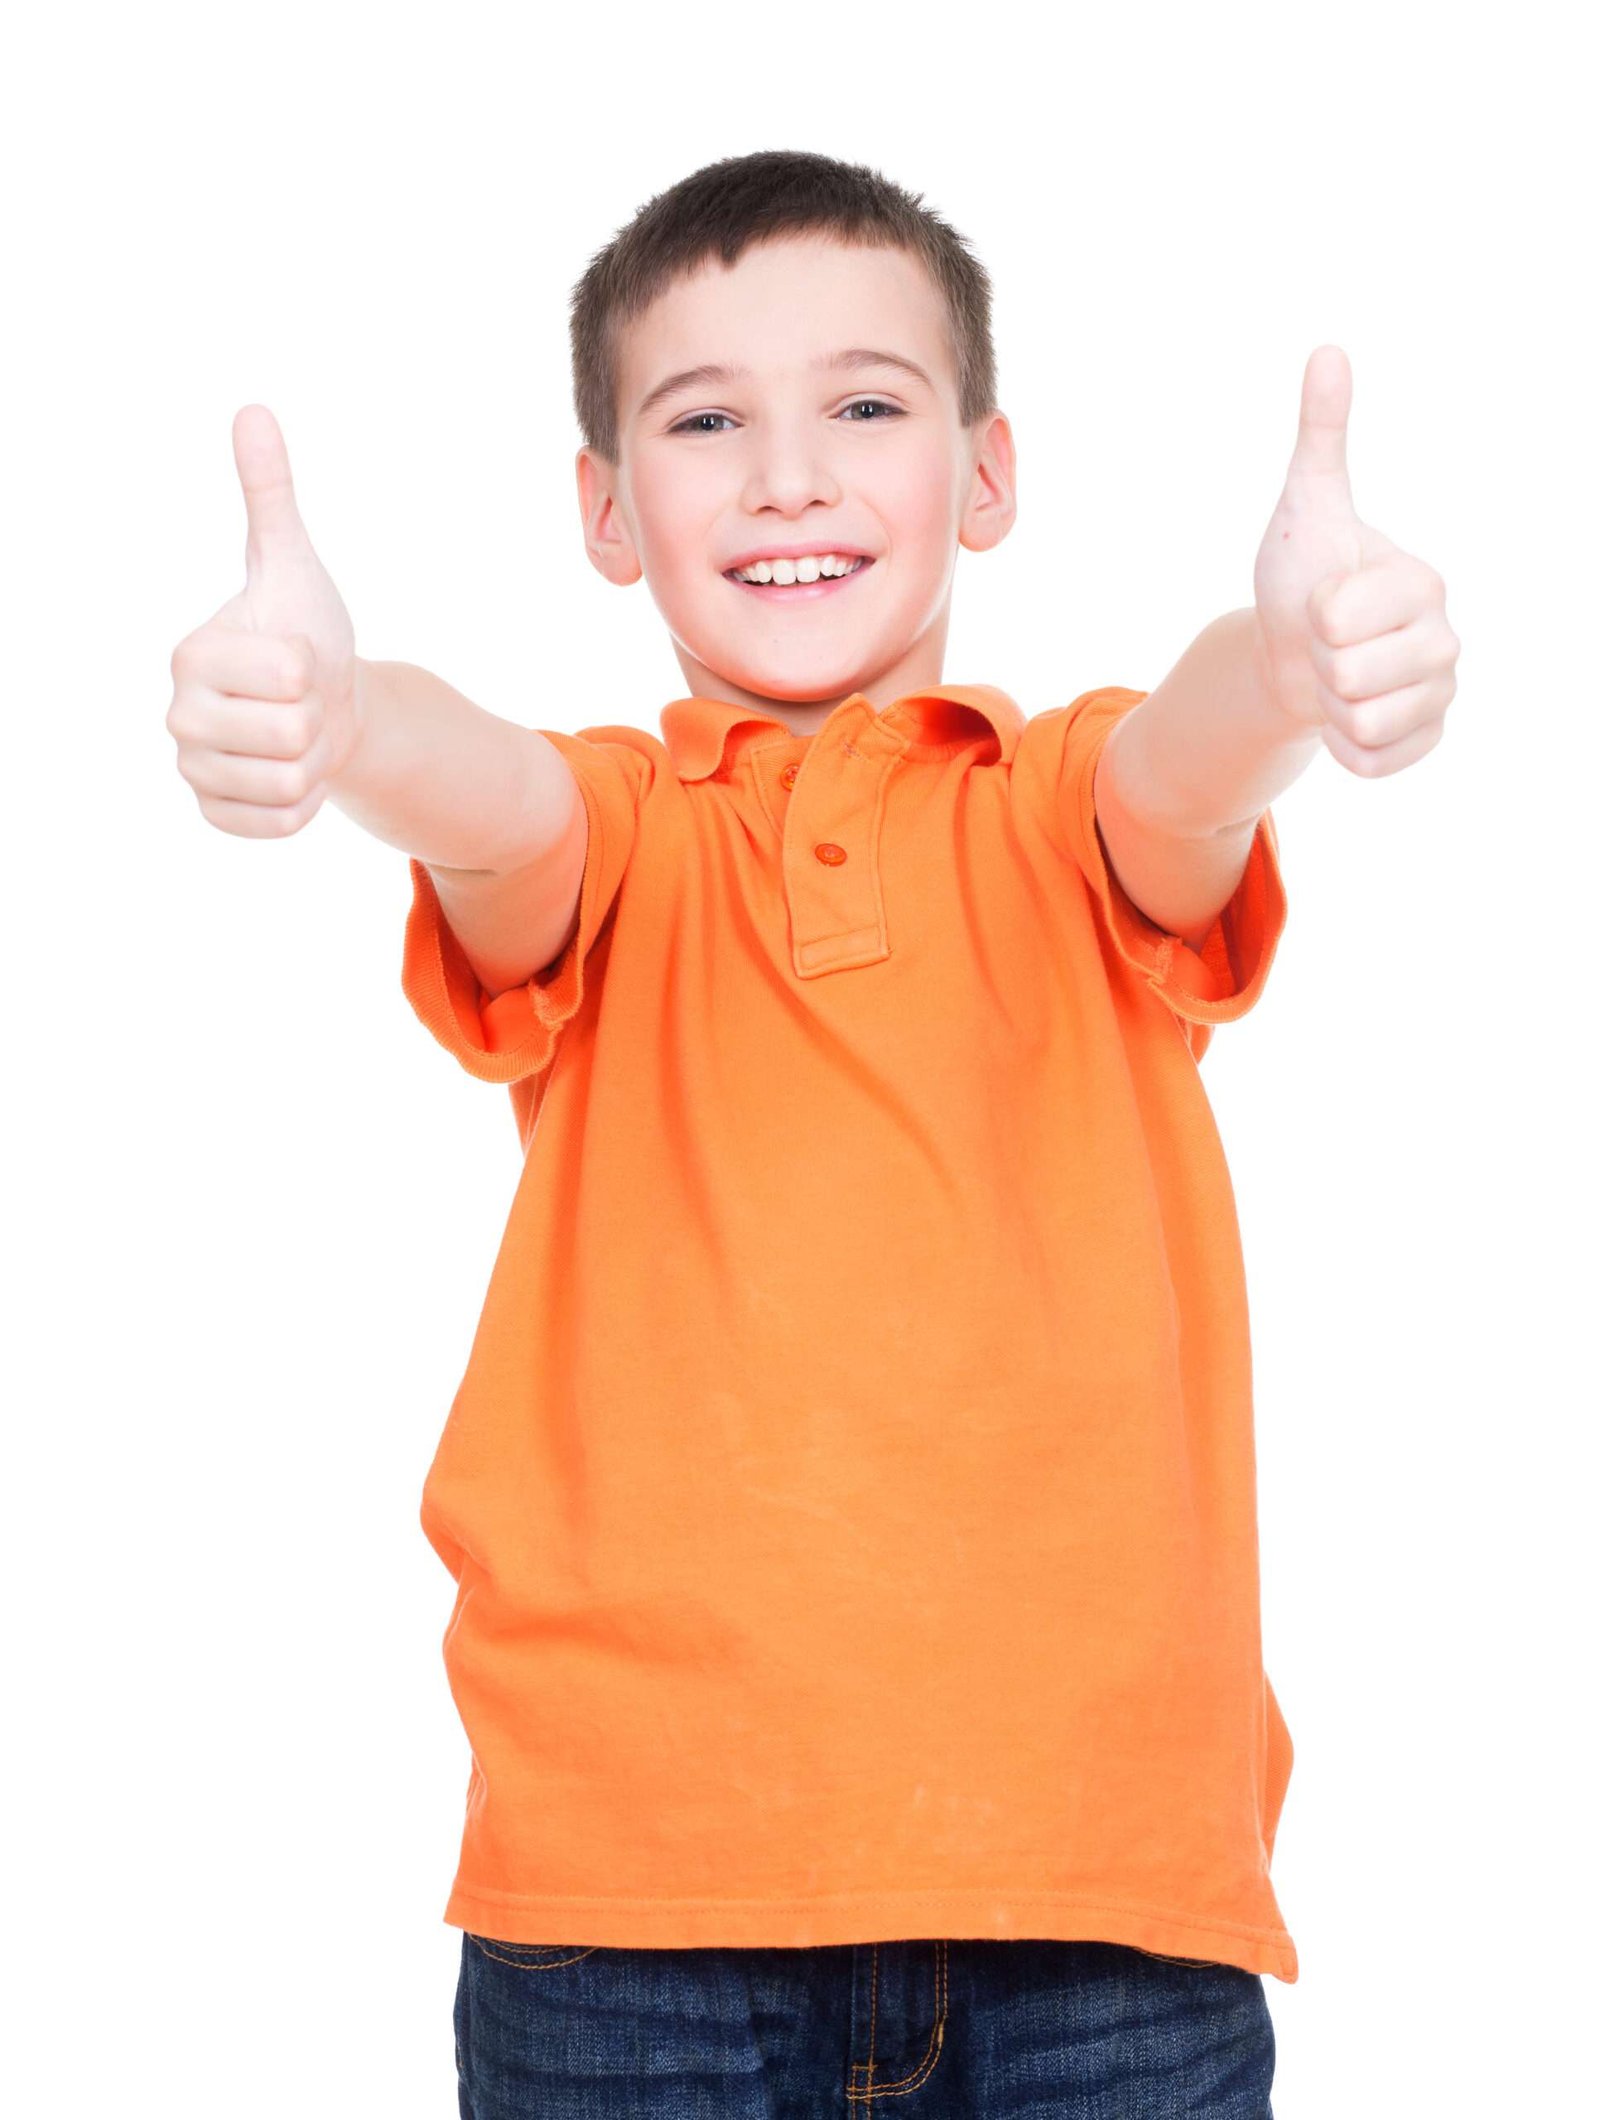 portrait-cheerful-boy-showing-thumbs-up-gesture-isolated-white-scaled